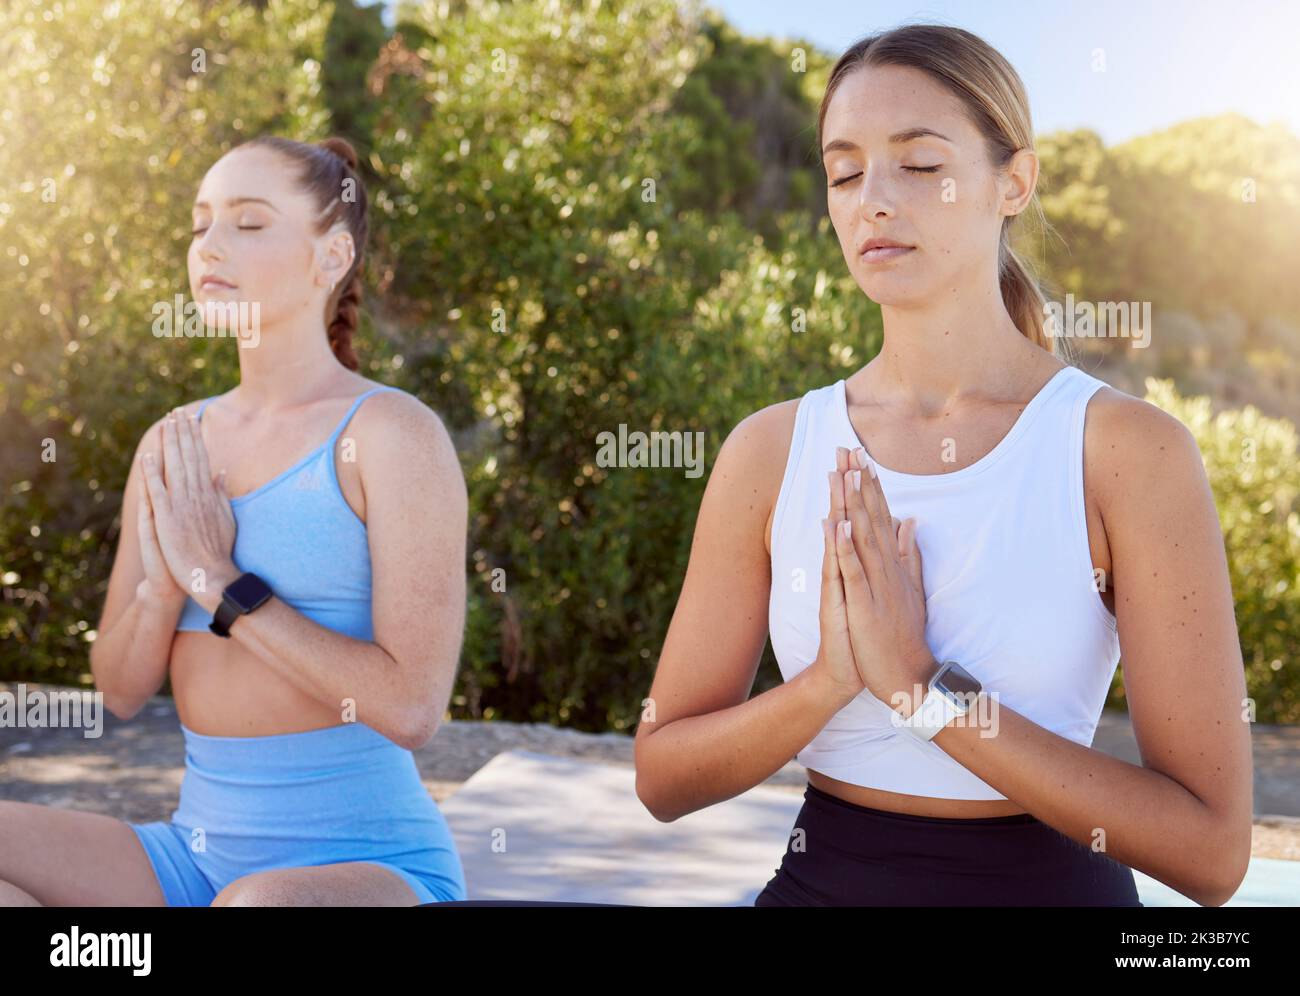 Yoga women, meditation and namaste praying for hope, zen and mindset in training, breathing and outdoor exercise. Calm, relax and focus fitness Stock Photo